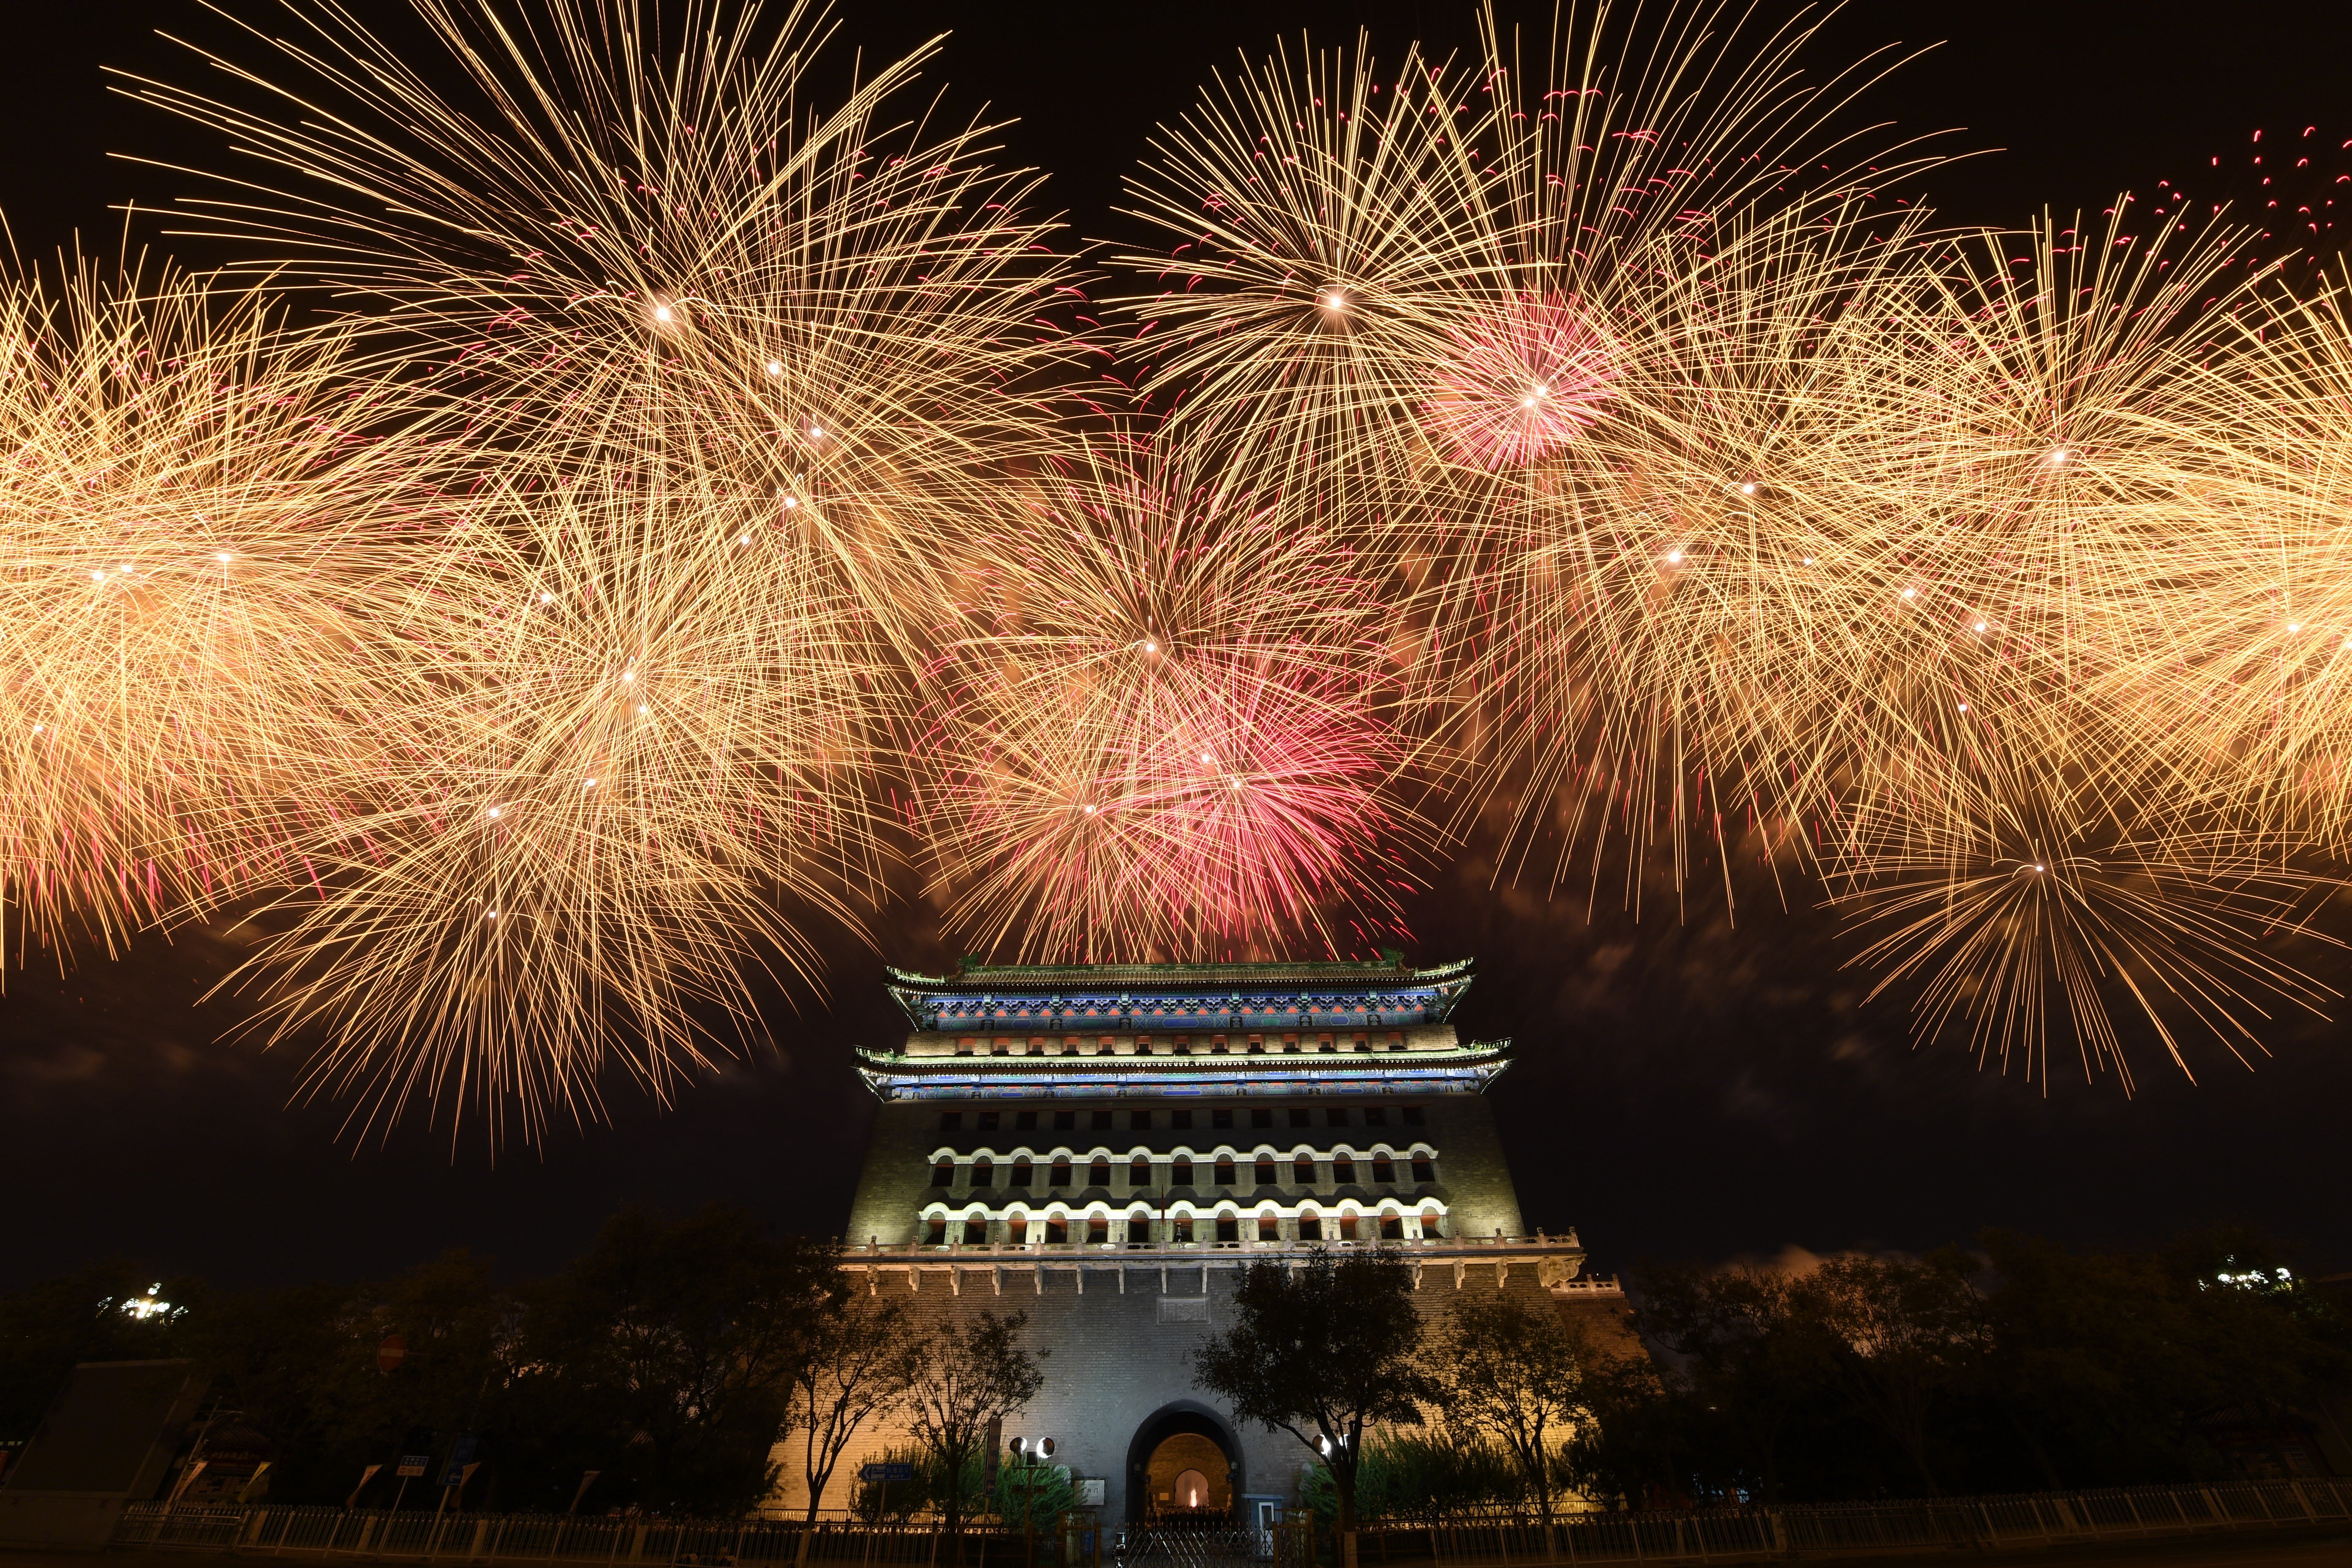 Fireworks light up the night sky during a gala show in Beijing on Tuesday. Photo: Xinhua